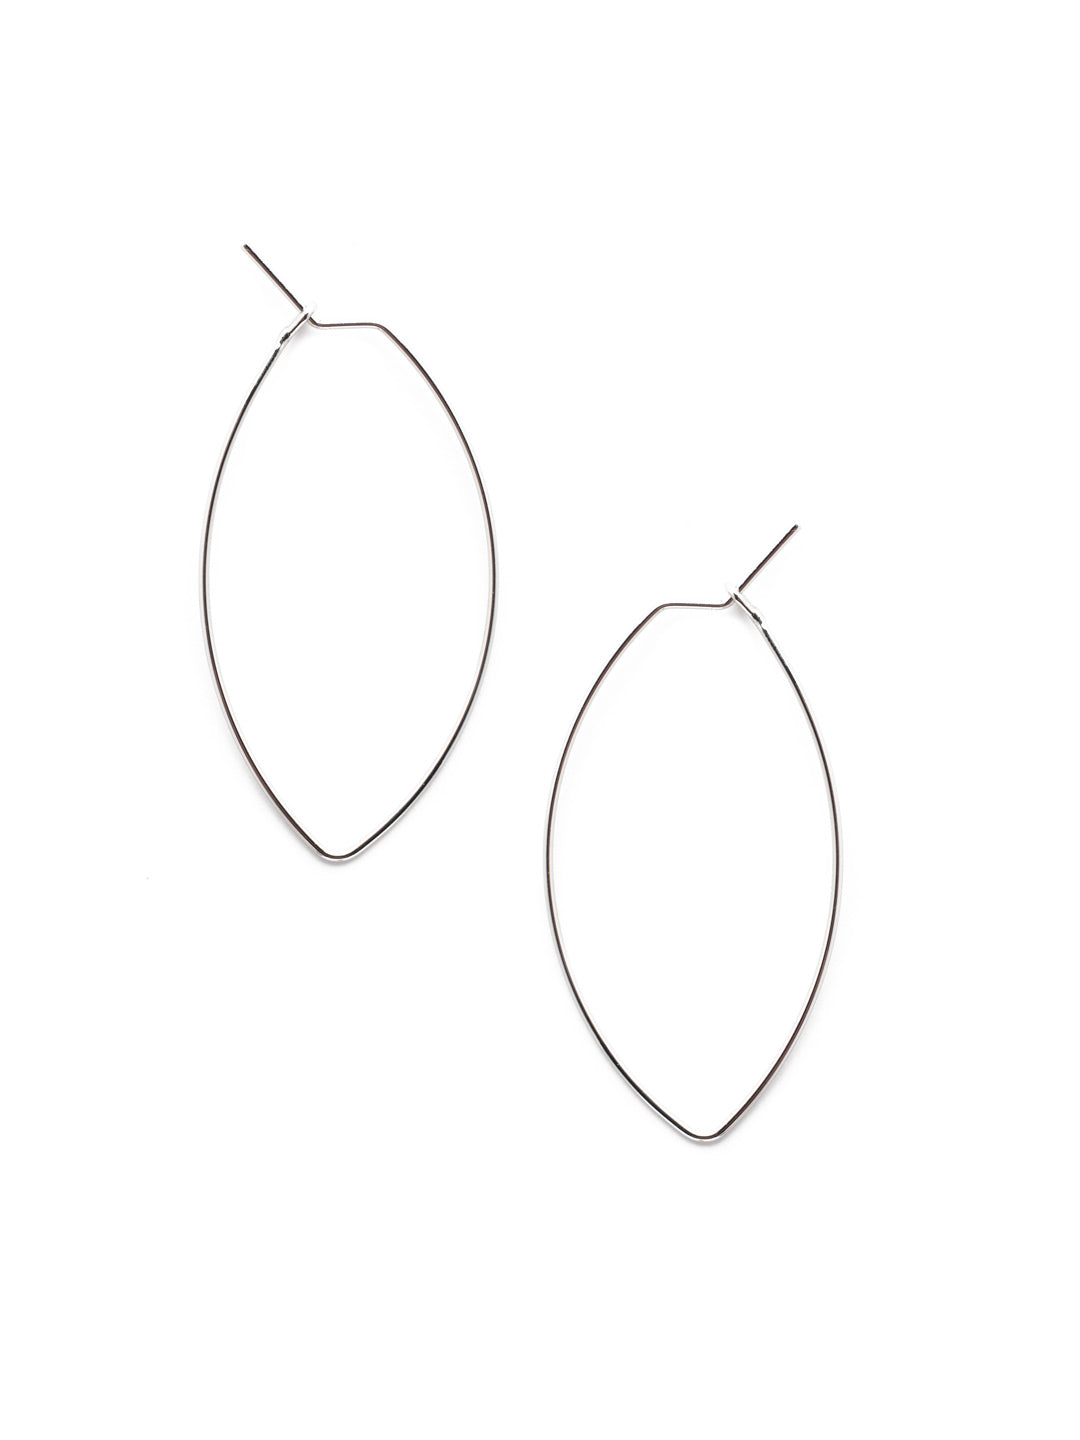 Caroline Hoop Earrings - 4EEV1PDMTL - <p>The Caroline Hoop Earrings are a trendy take on the classic hoop; long delicate elongated wires clasp behind each lobe. From Sorrelli's Bare Metallic collection in our Palladium finish.</p>